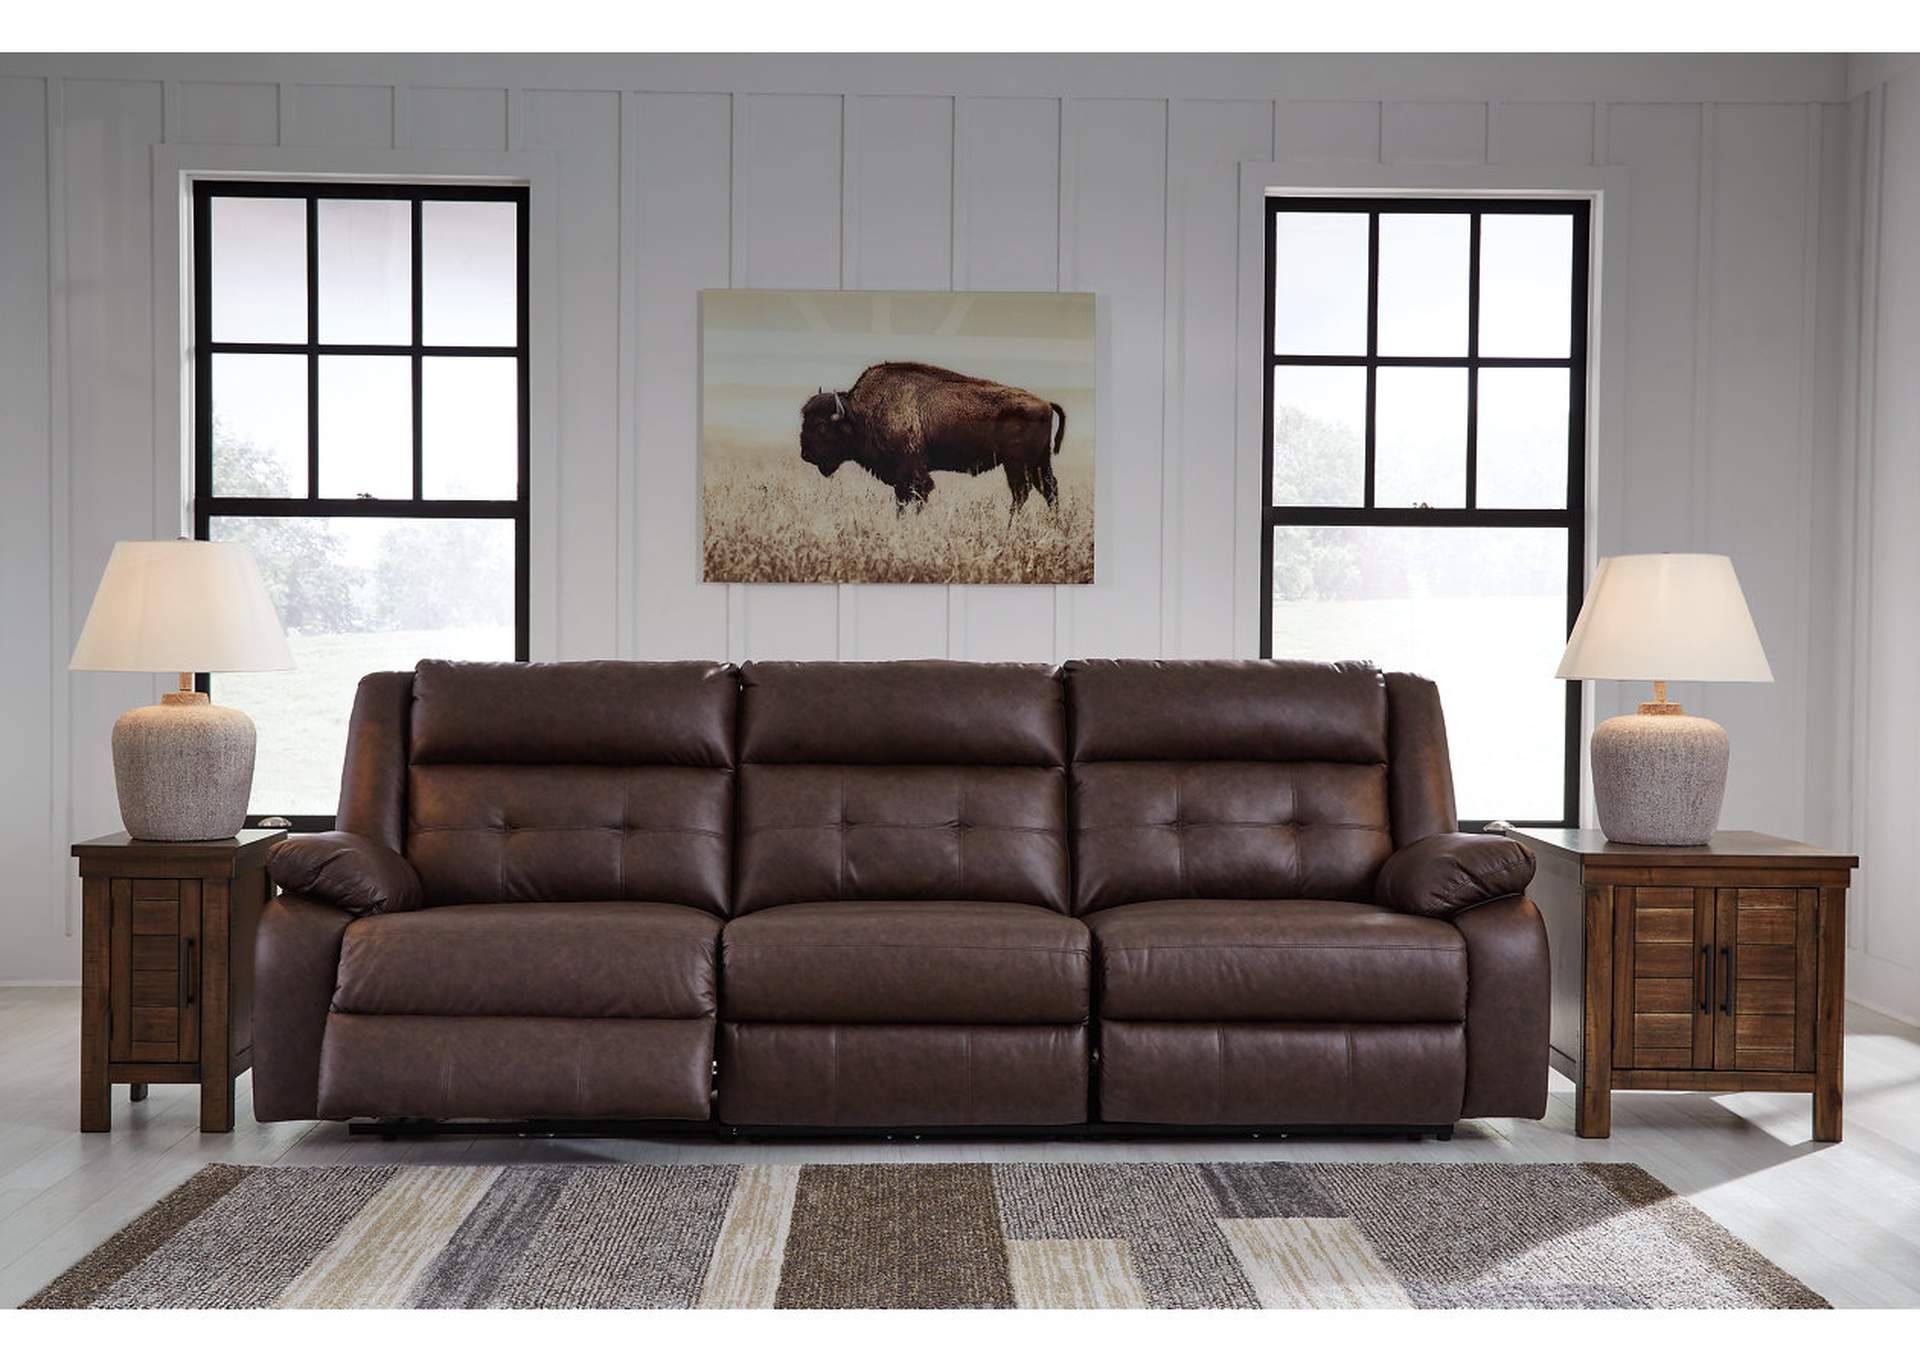 Punch Up 3-Piece Power Reclining Sectional Sofa,Signature Design By Ashley